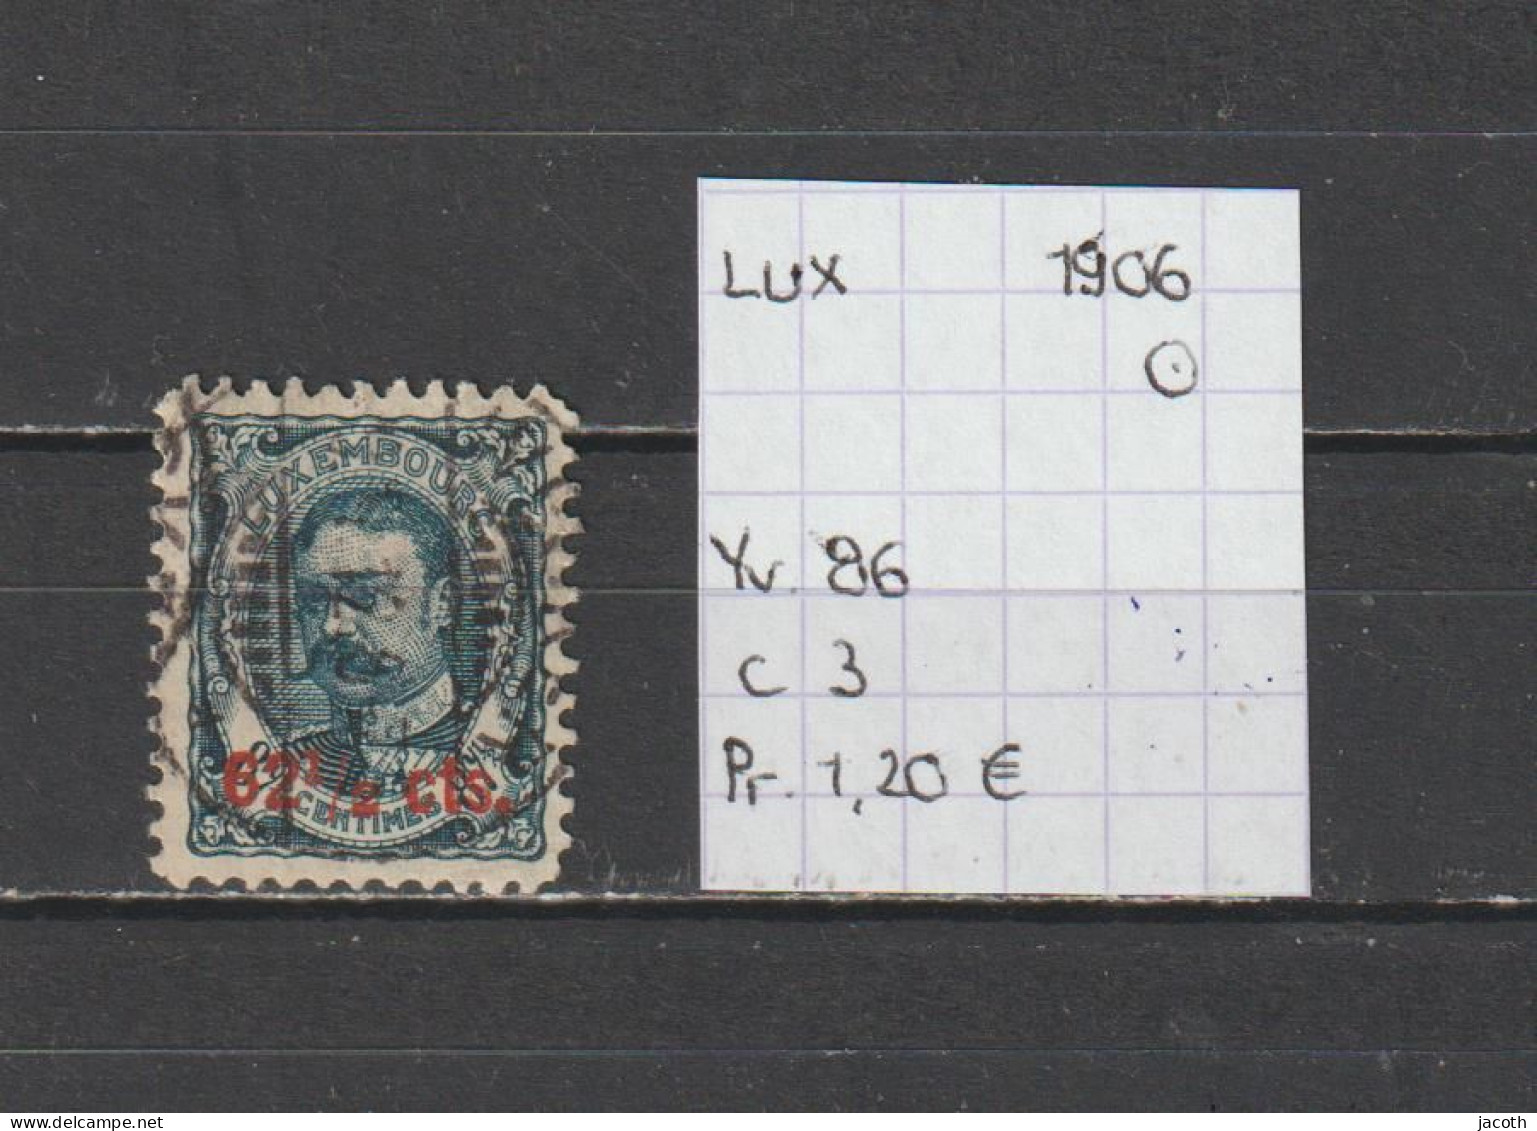 (TJ) Luxembourg 1906 - YT 86 (gest./obl./used) - 1906 Willem IV